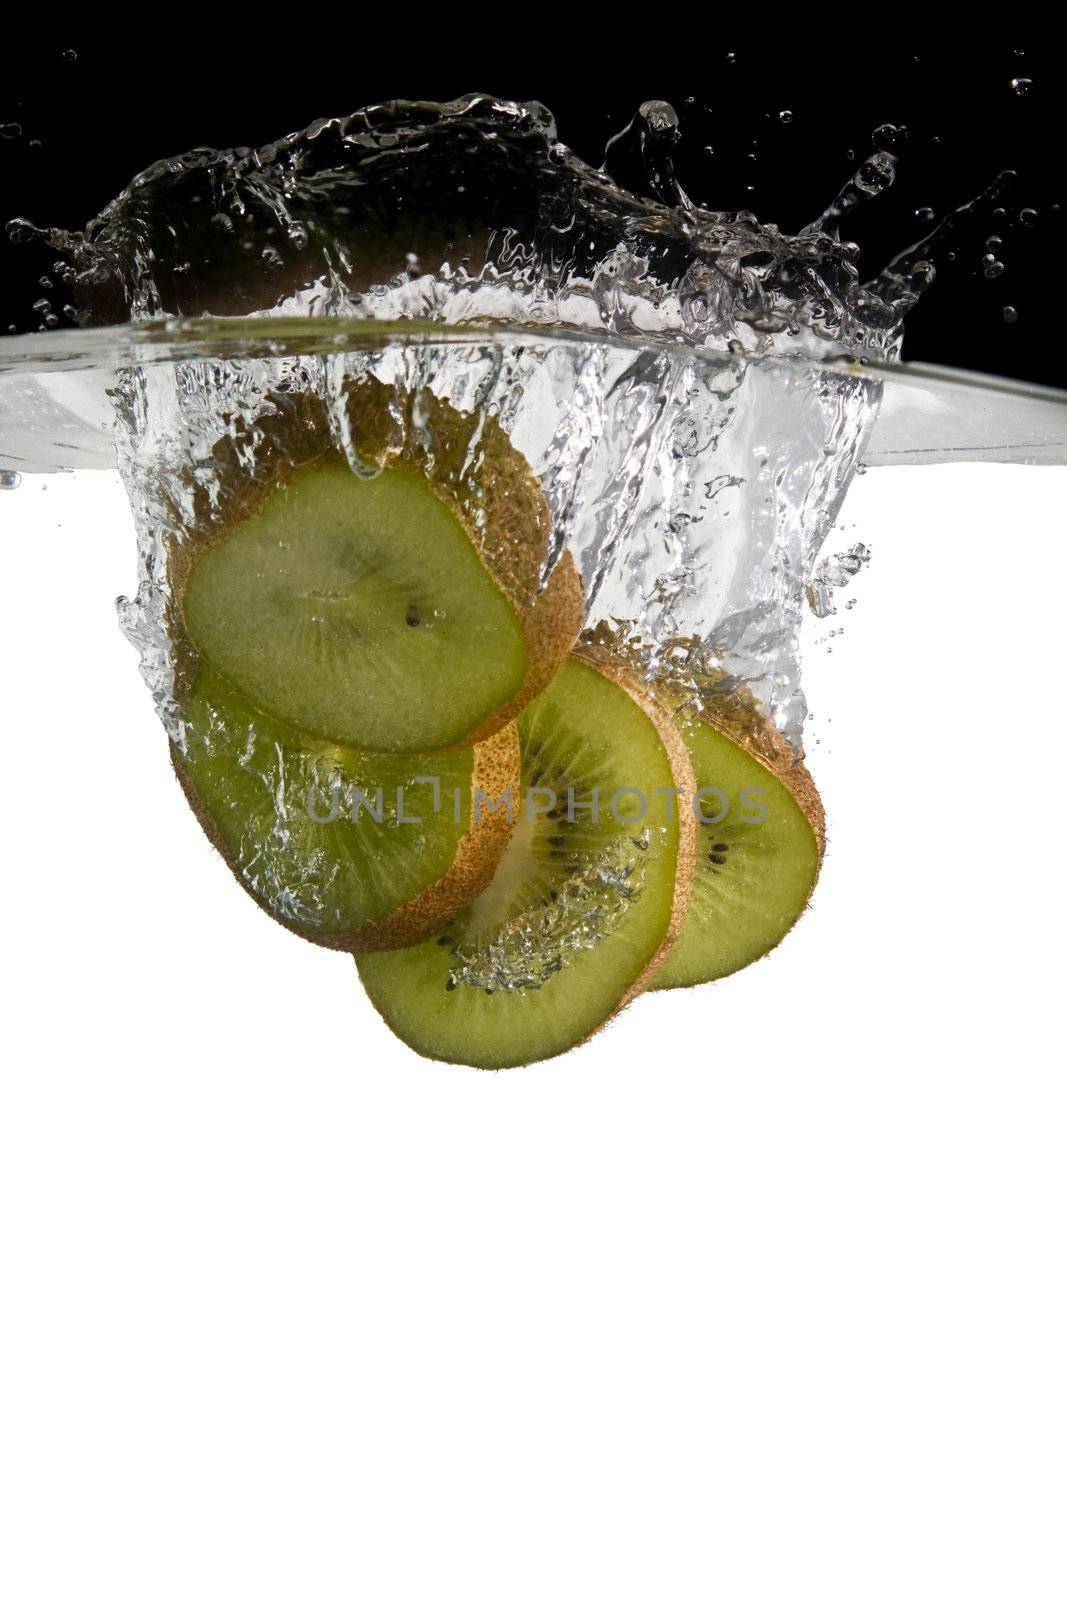 some slices of kiwifruit thrown in water with black and white background